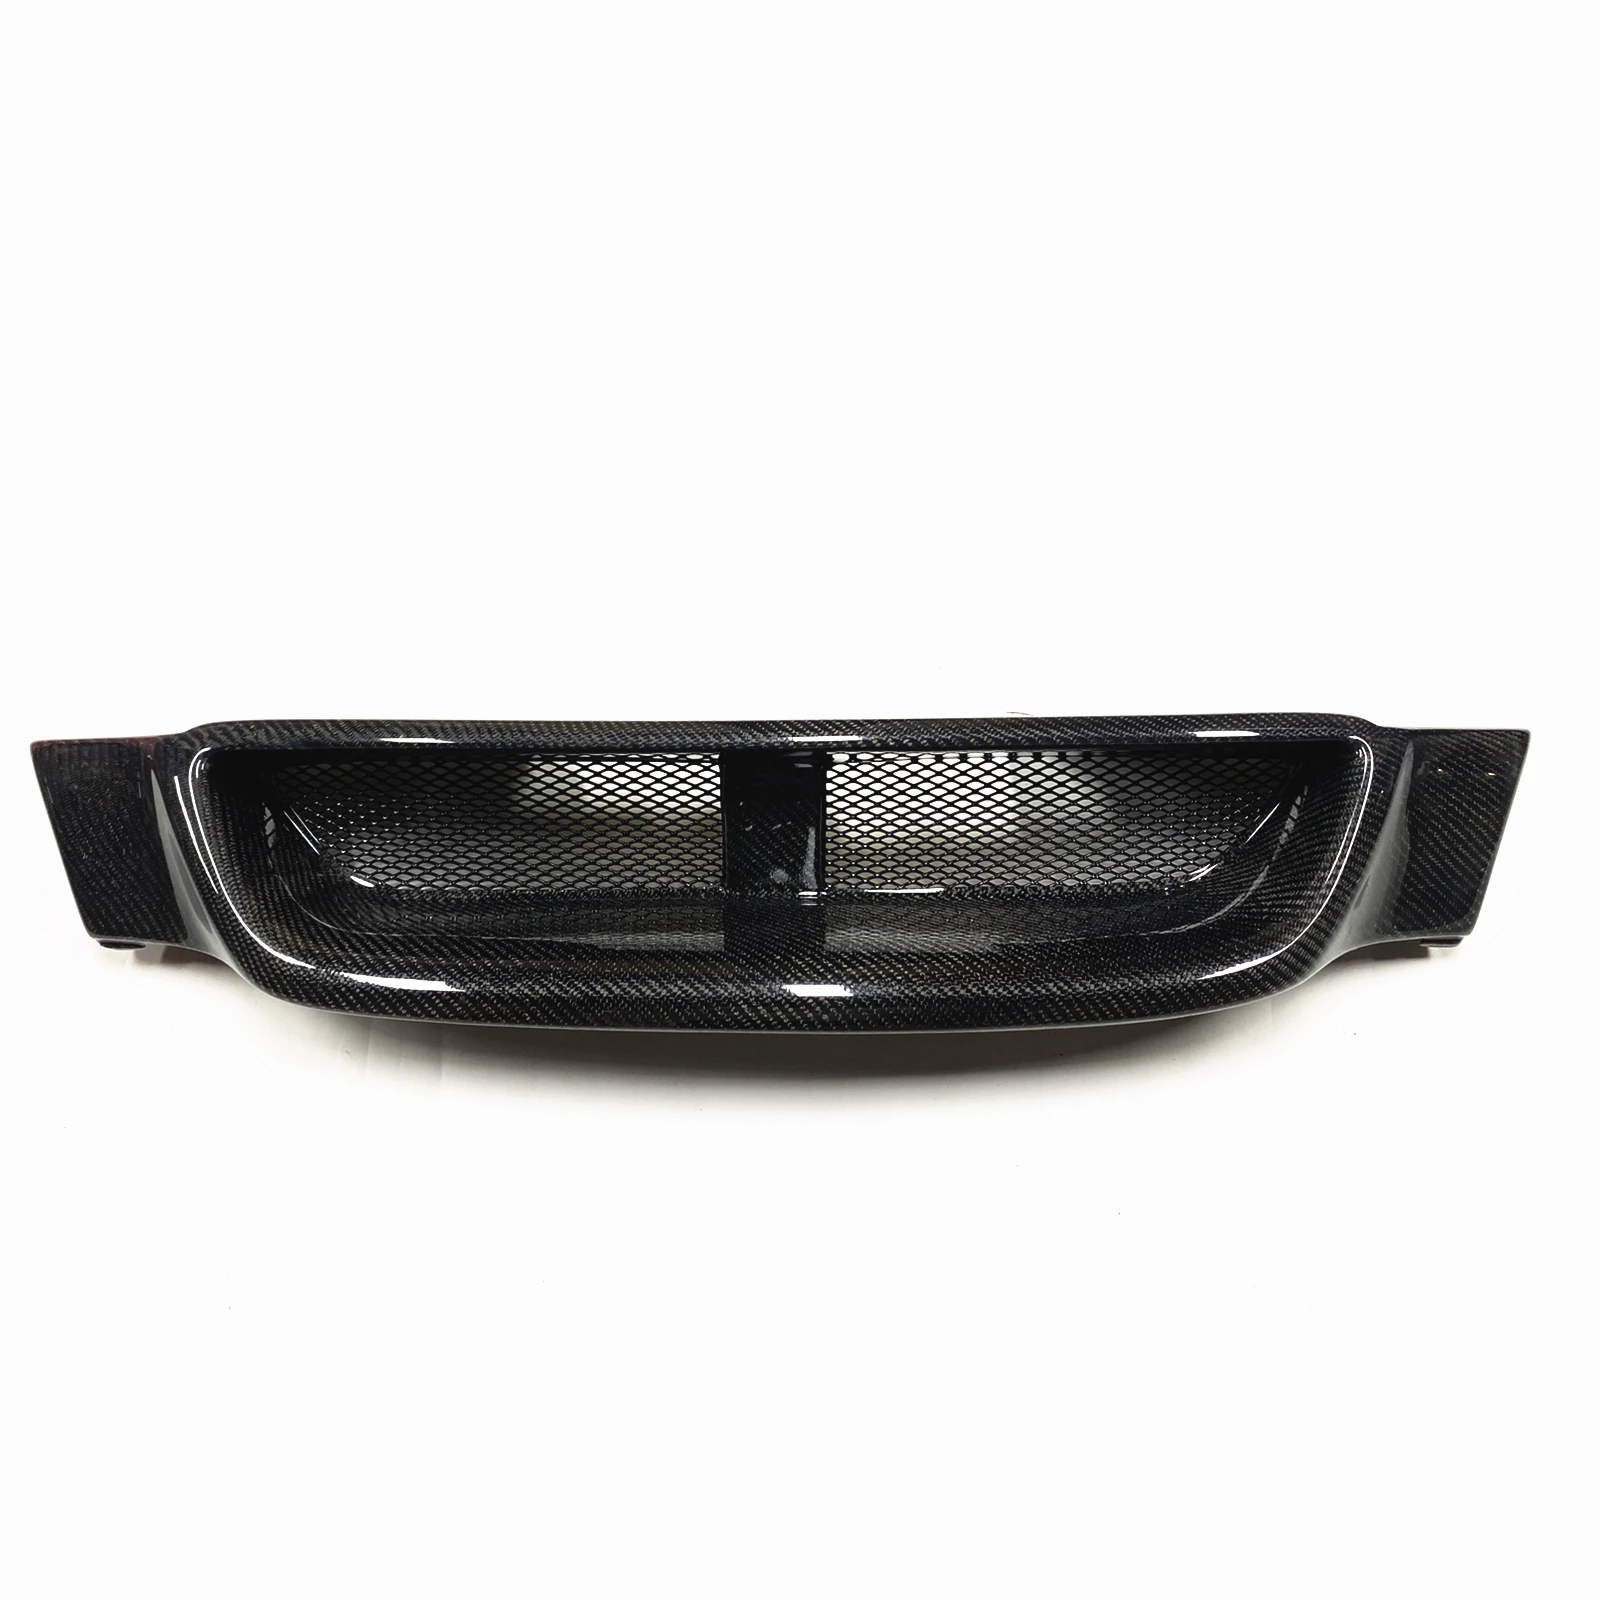 Racing Grills Front Grille For Acura 2.5 TL 1996-1998 Honeycomb Style Car  Carbon Fiber Upper Bumper Hood Mesh Replace Body Kit AliExpress